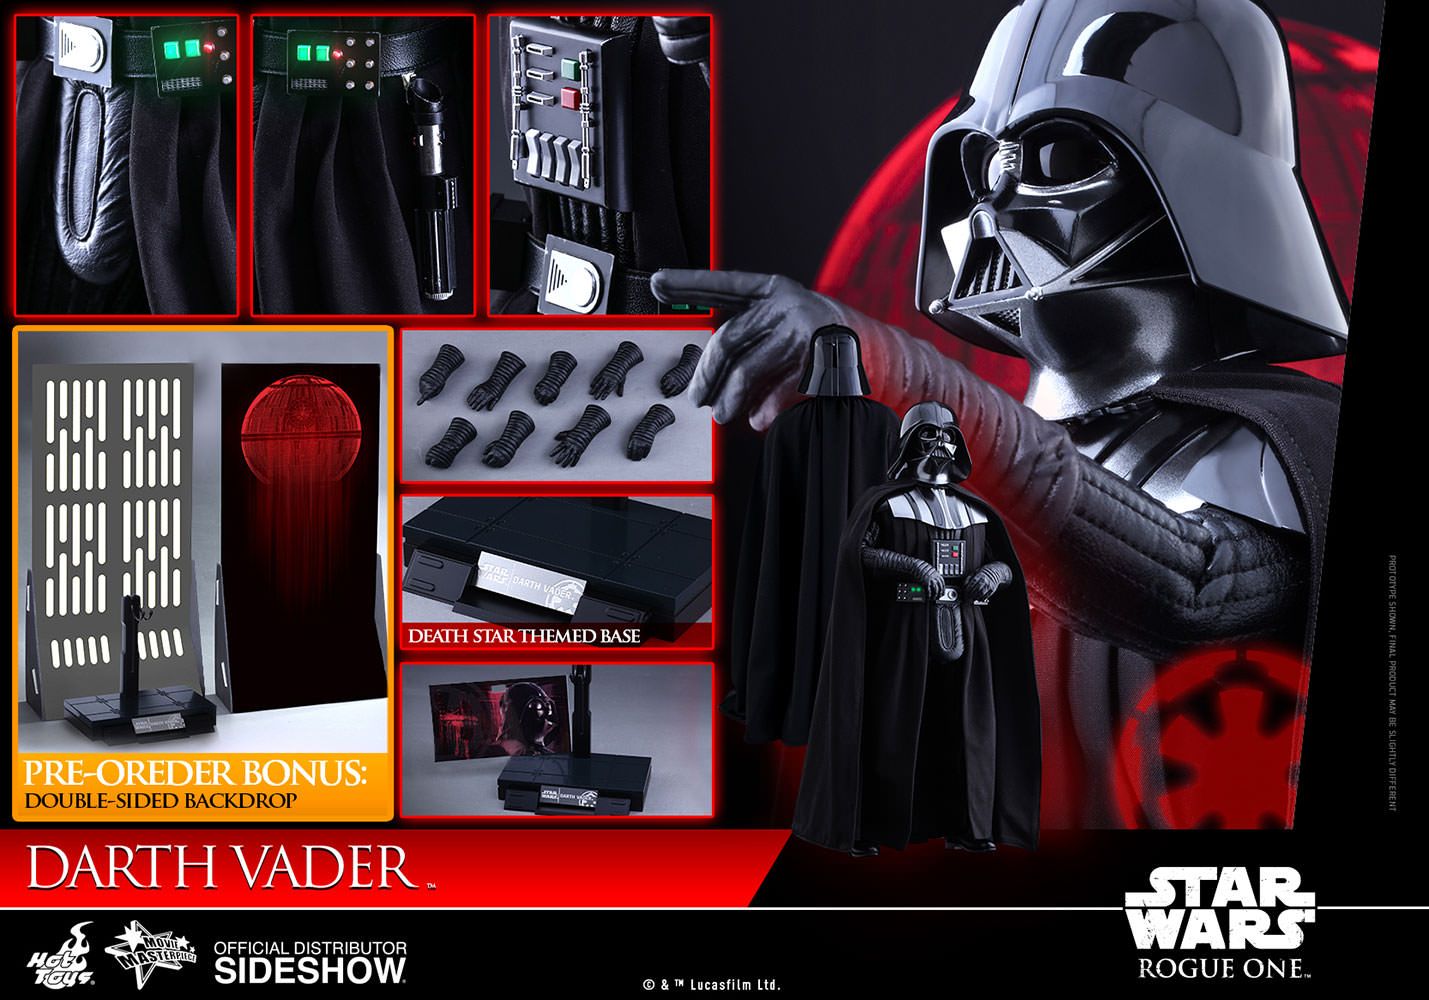 star-wars-rogue-one-darth-vader-sixth-scale-hot-toys-902861-16